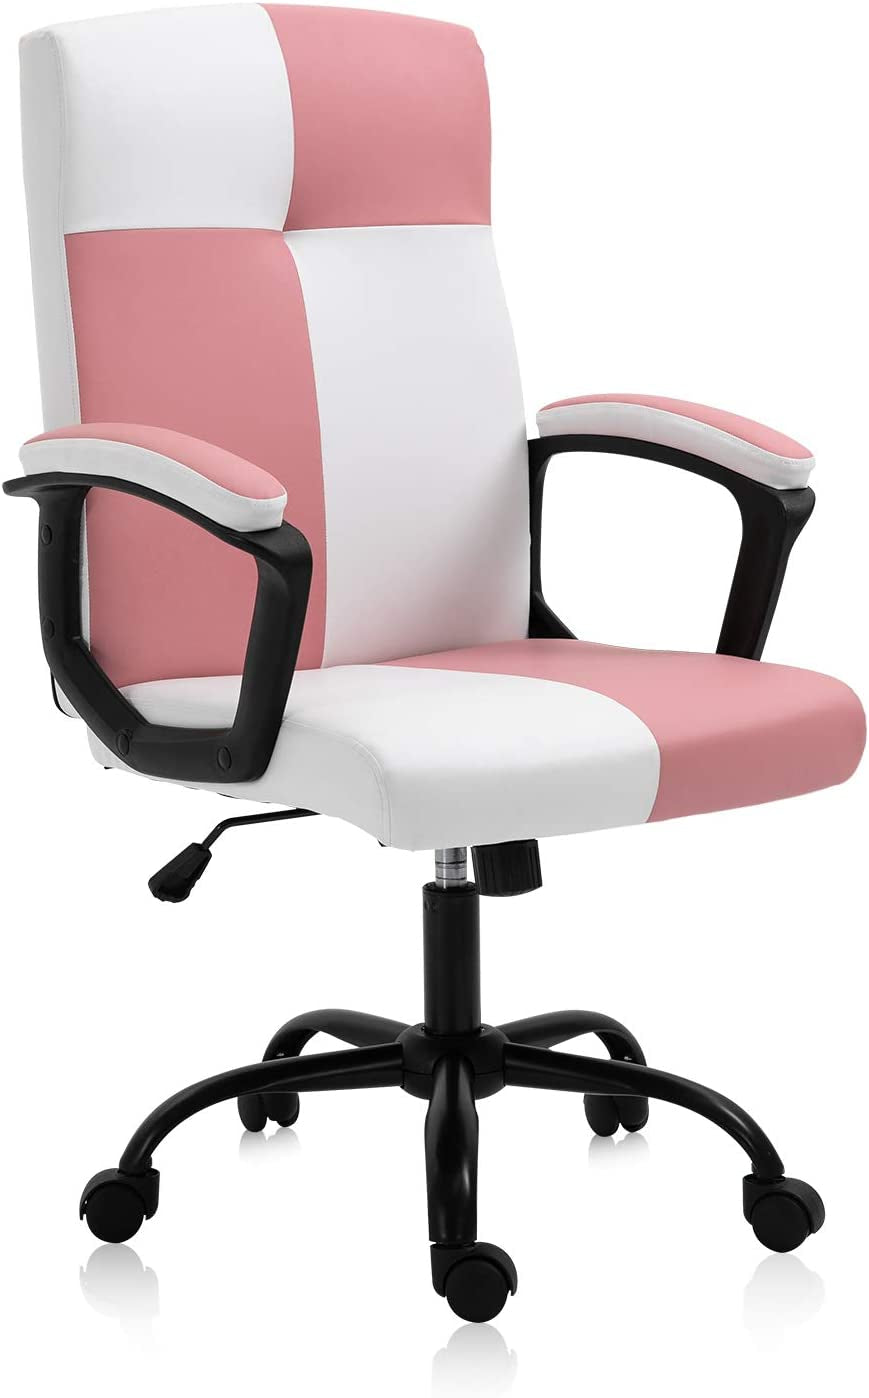 High Back Home Office Desk Chair, Modern PU Leather Office ChairHigh Back Home Office Desk Chair, Modern PU Leather Office Chair with 
❤Unique Color Design: Contrast color design is an art that makes this leather office chair stand out from all the other chairs. The strong visual difference makes iChairsLive Online MallLive Online MallHigh Back Home Office Desk Chair, Modern PU Leather Office Chair